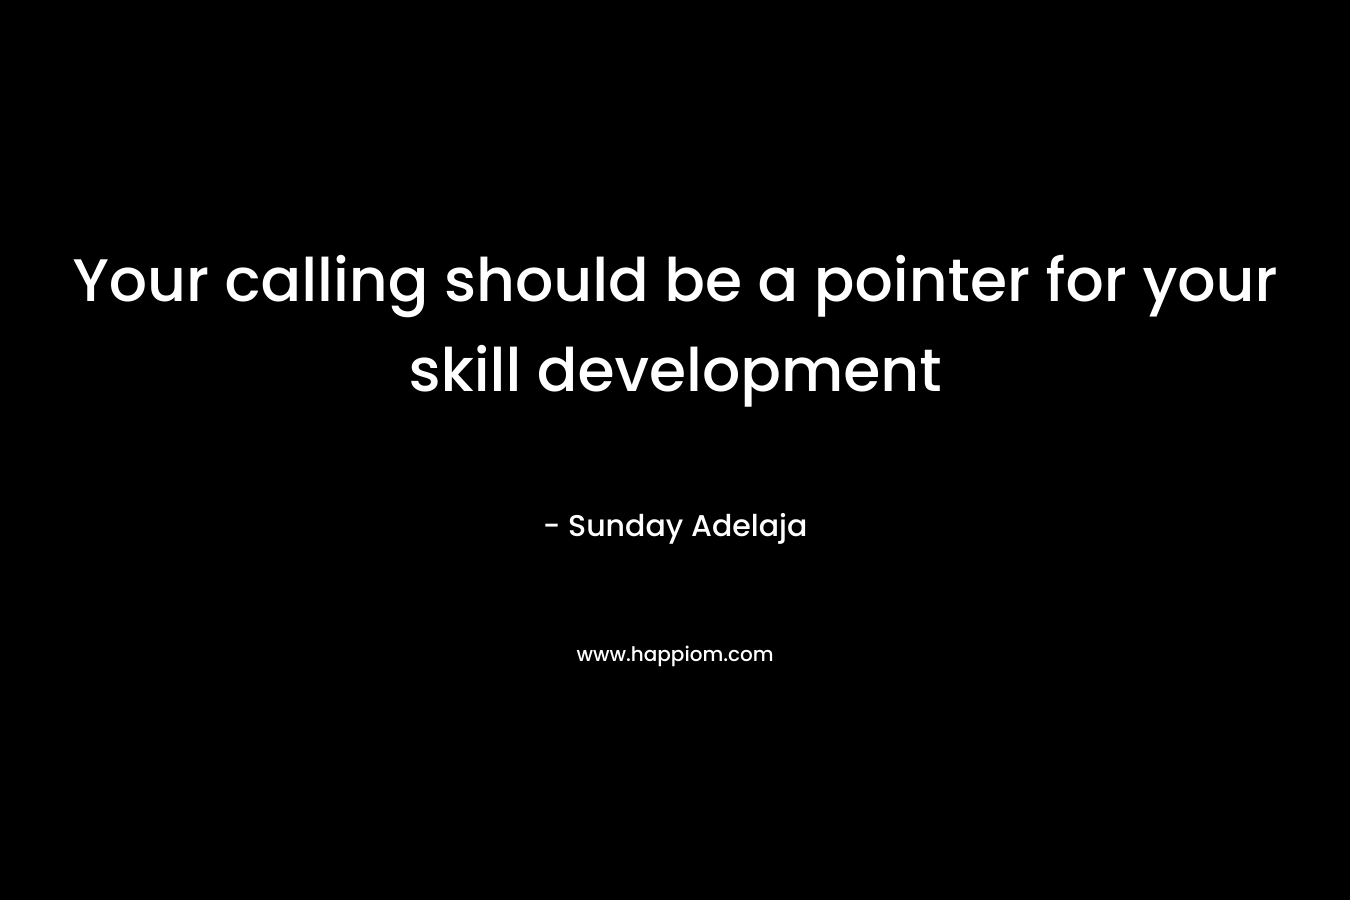 Your calling should be a pointer for your skill development